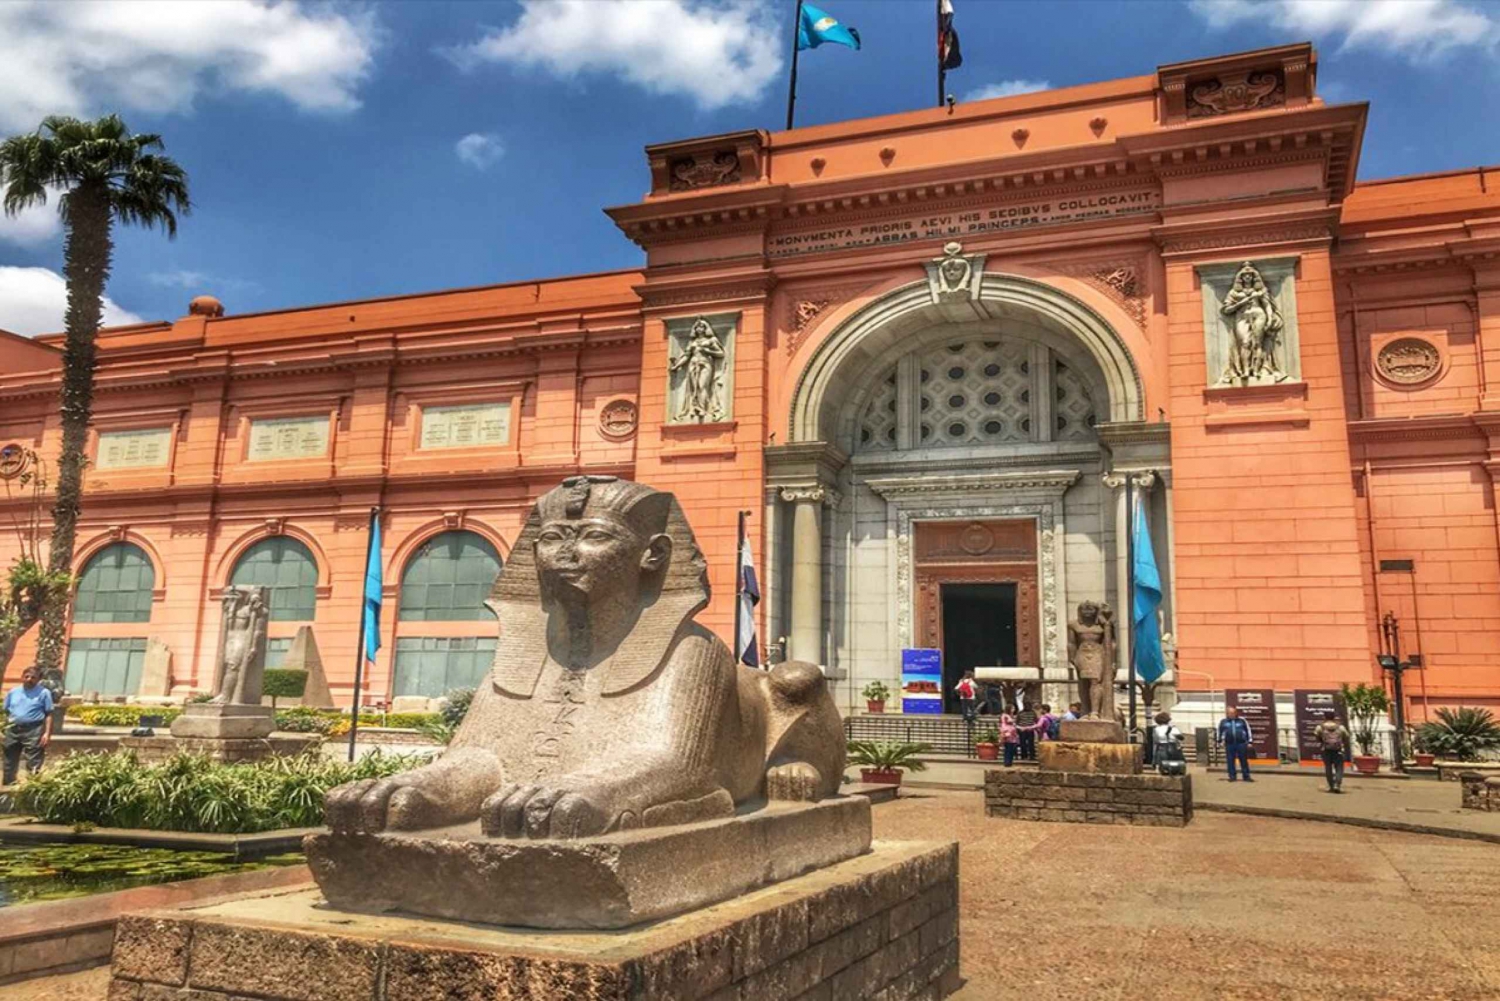 Cairo: National Museum and Egyptian Museum Tour with Lunch